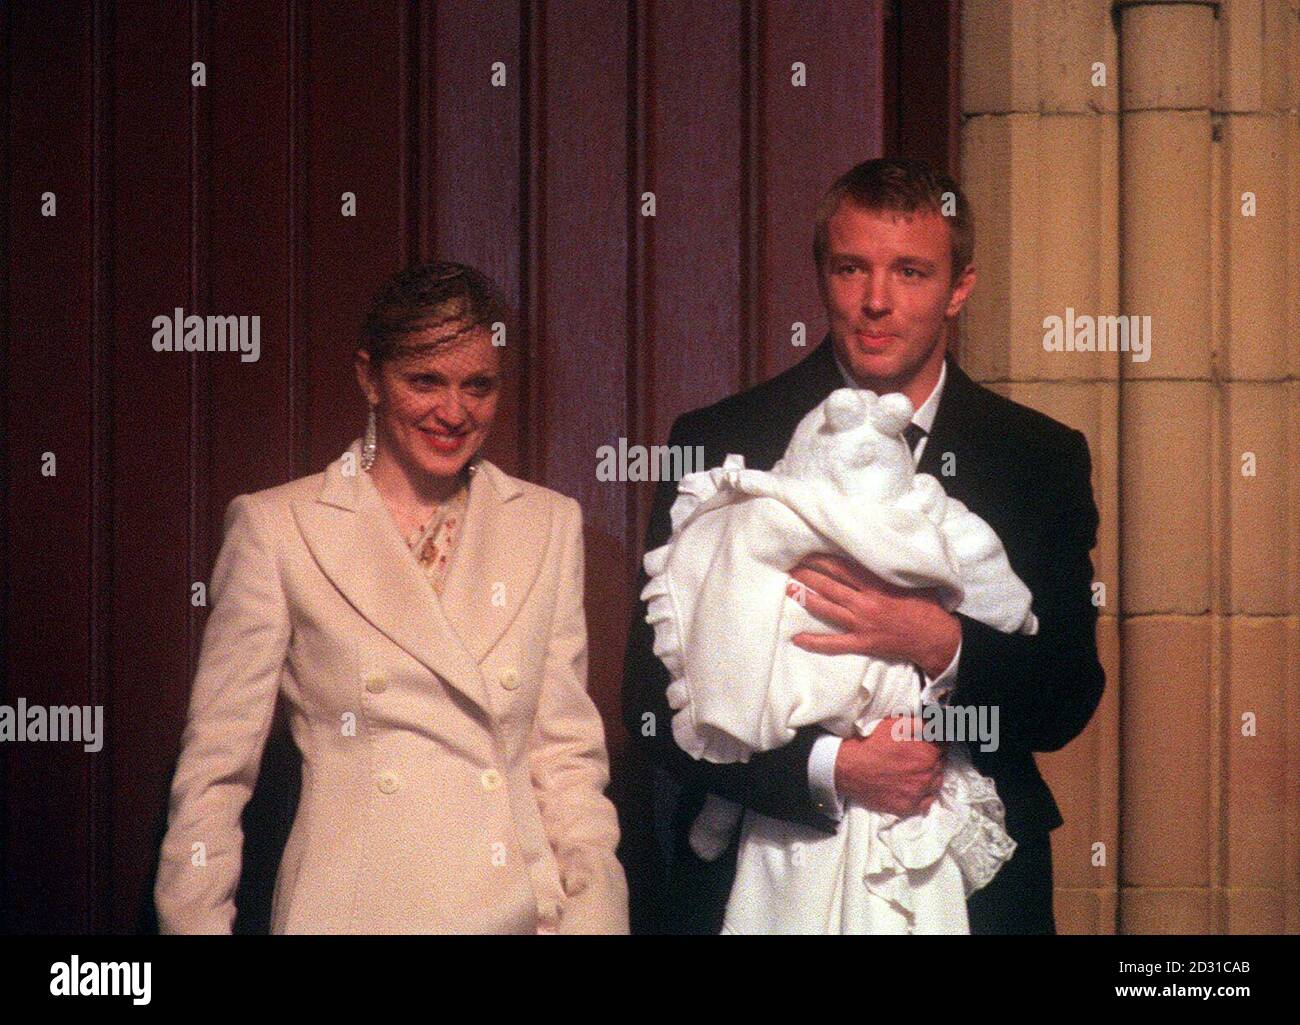 American singer Madonna and British film director Guy Ritchie with their four-month-old baby son Rocco, wrapped in a white christening gown, after the baby was christened at Dornoch Cathedral in Sutherland, Scotland.  * 29/3/01: A man who hid behind a cathedral organ to secretly film the star-studded christening service for Madonna's baby was appearing at court for sentence. At a previous hearing at Dornoch Sheriff Court, Sheriff Ian Cameron called for Robert Podesta to appear in person to give a full picture of his financial circumstances before sentencing.    Stock Photo